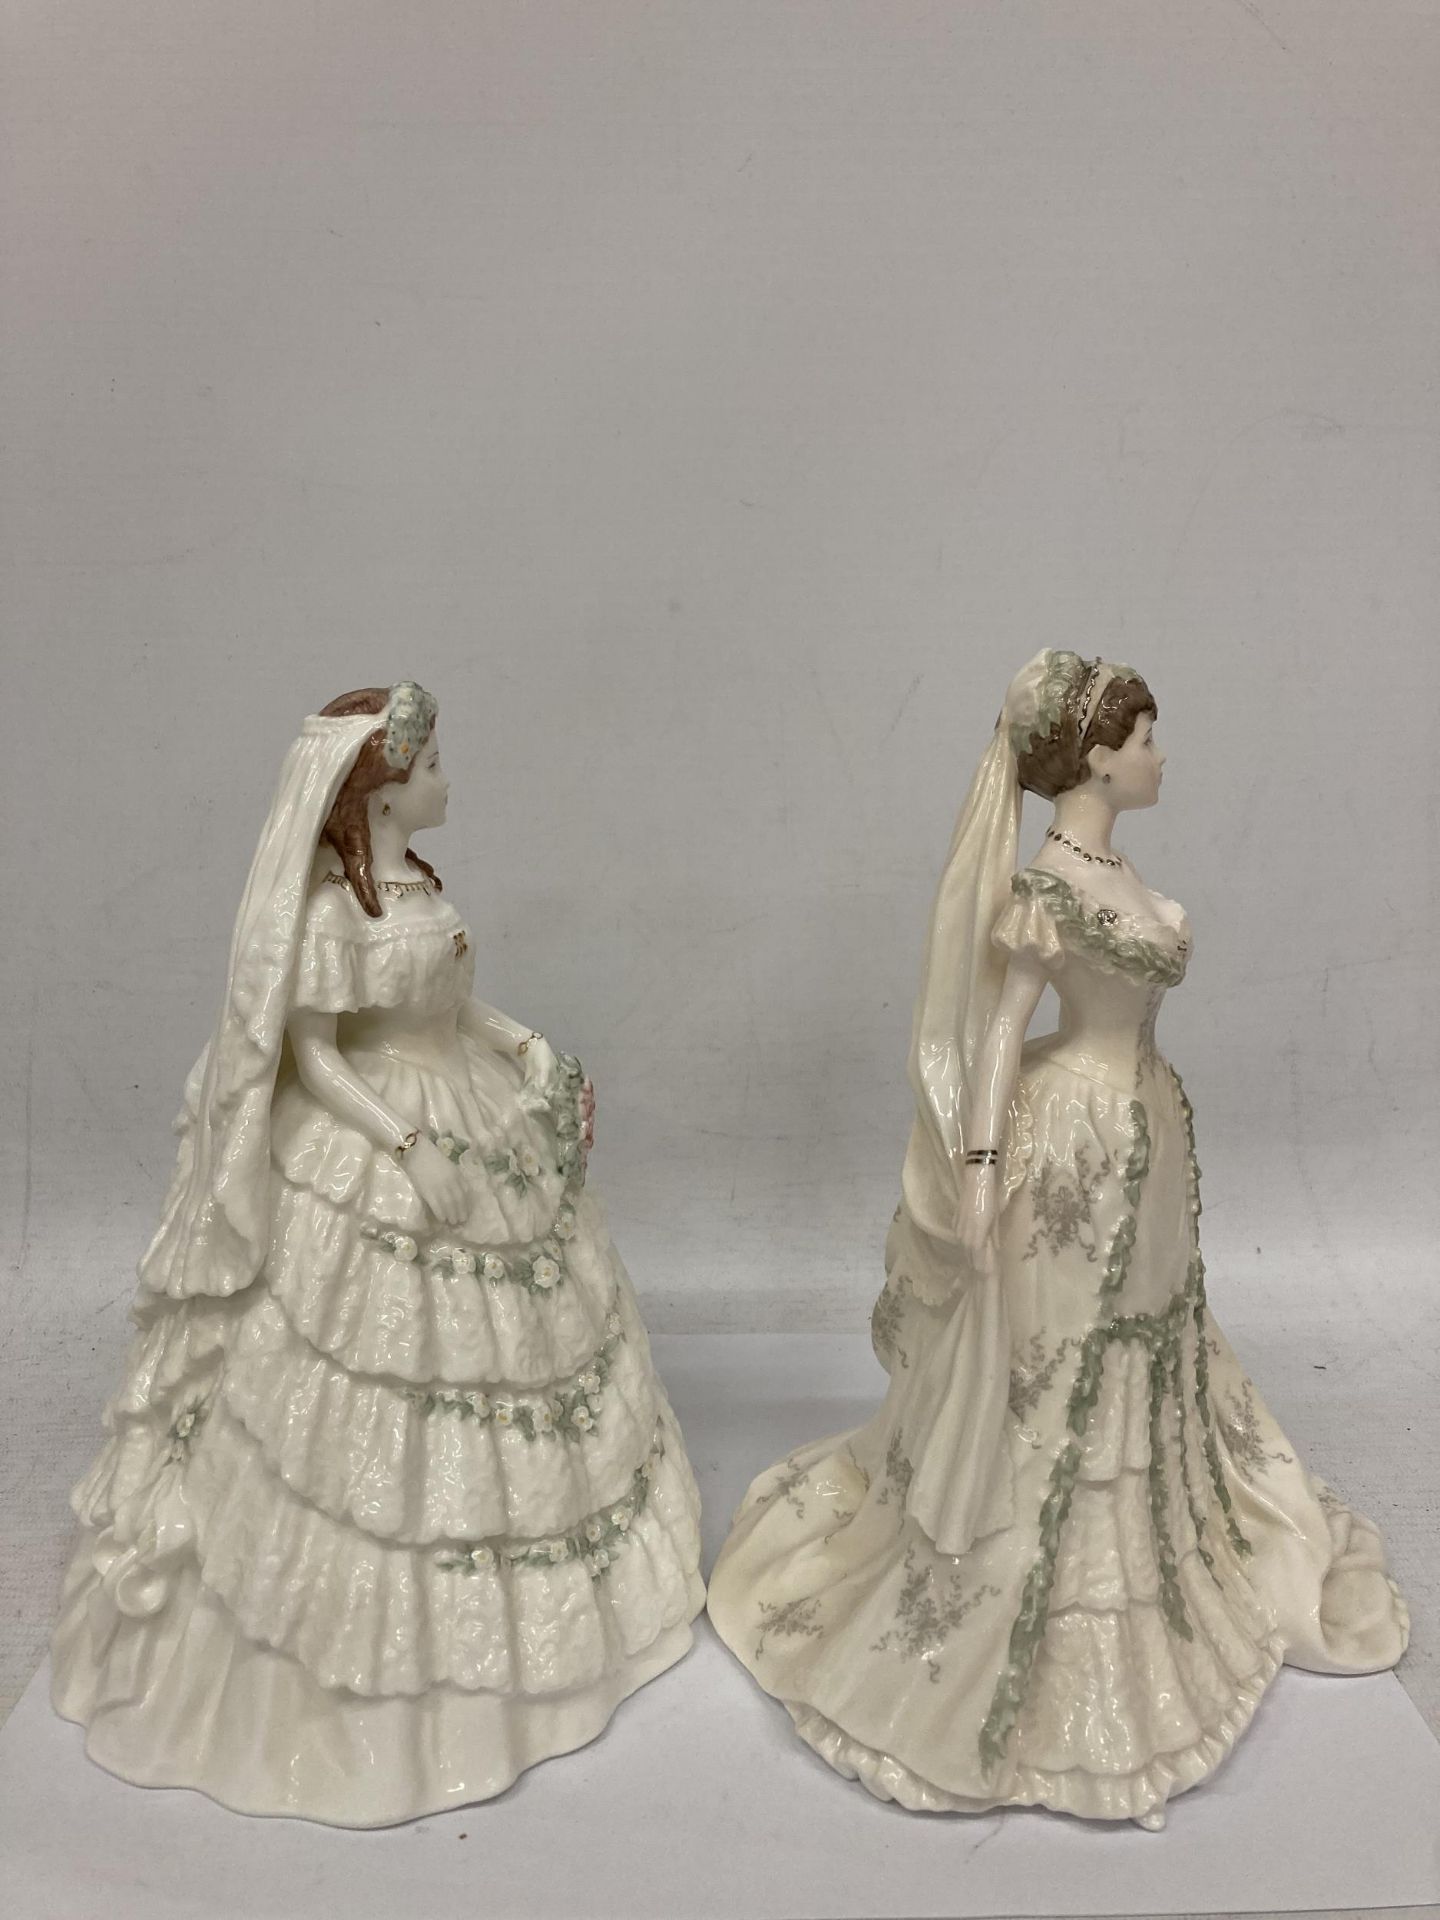 TWO COALPORT FIGURINES "PRINCESS ALEXANDRA" LIMITED EDITION 2884 OF 7500 AND "QUEEN MARY" LIMITED - Image 2 of 5